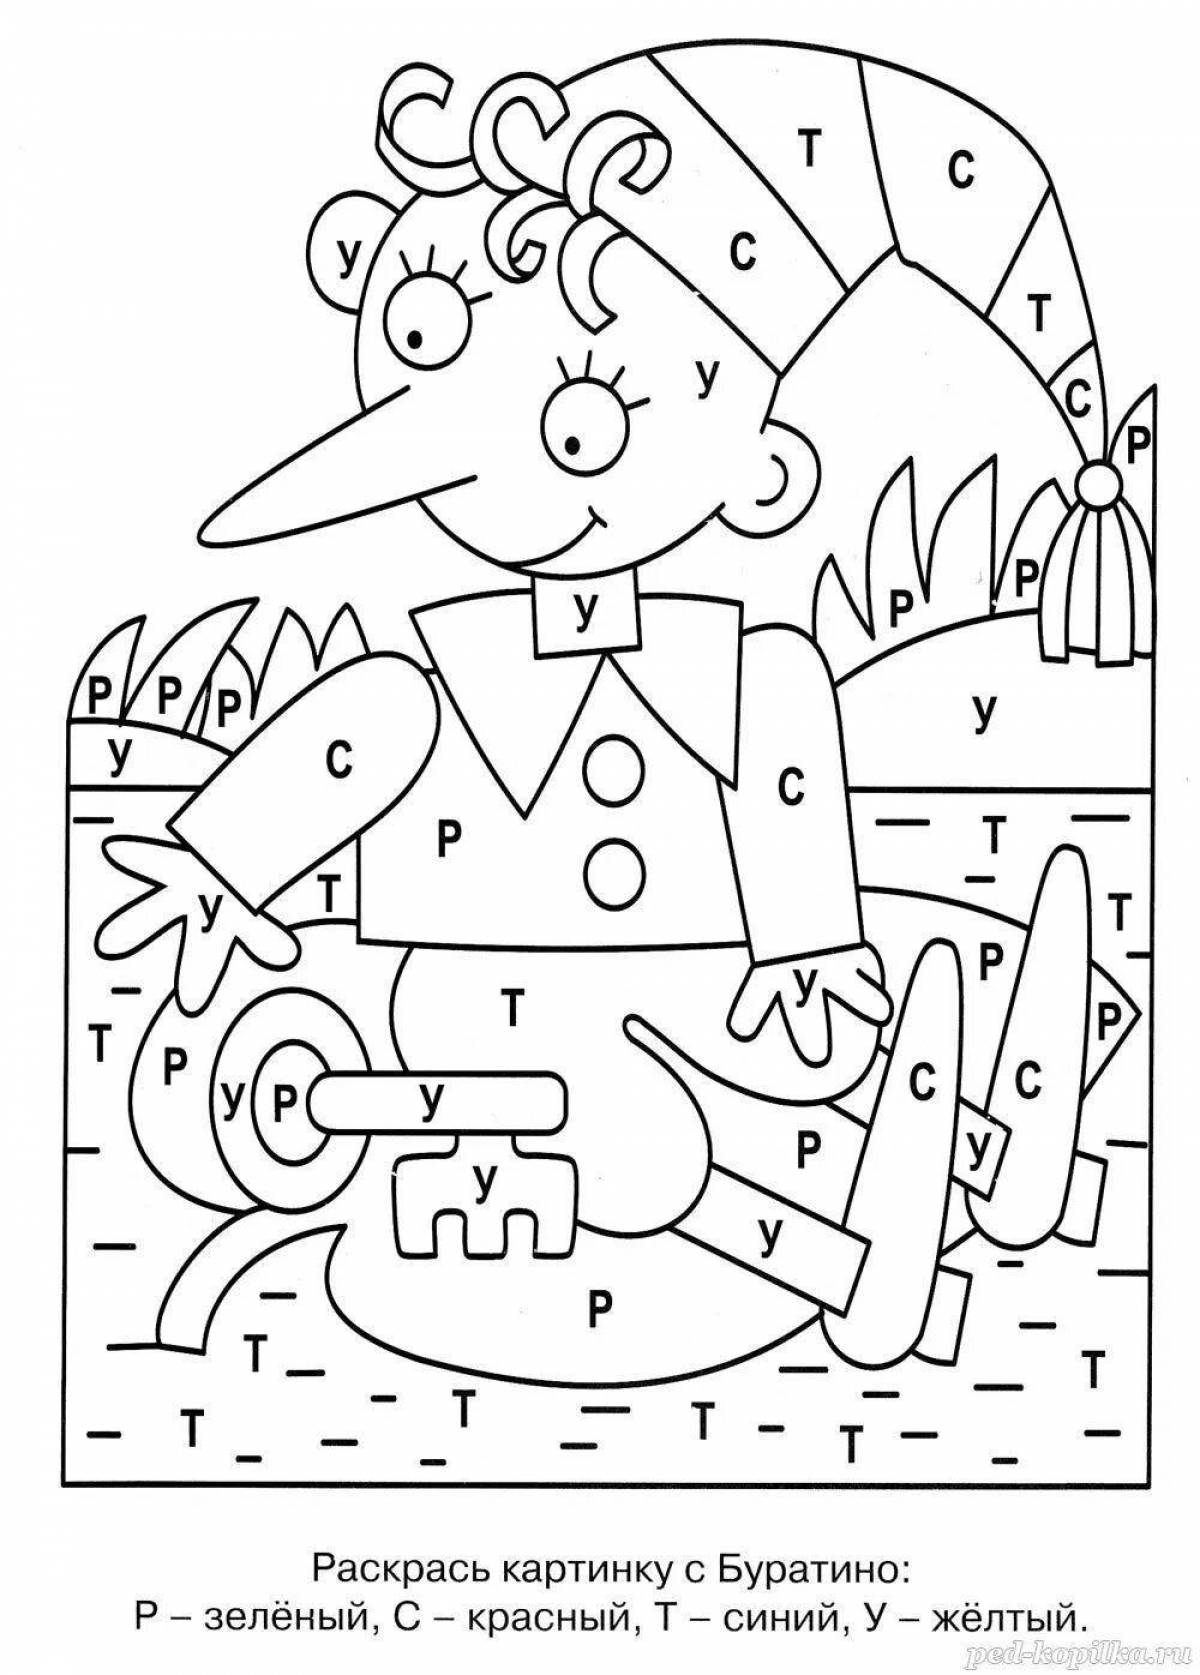 Colorful fun coloring book intelligent